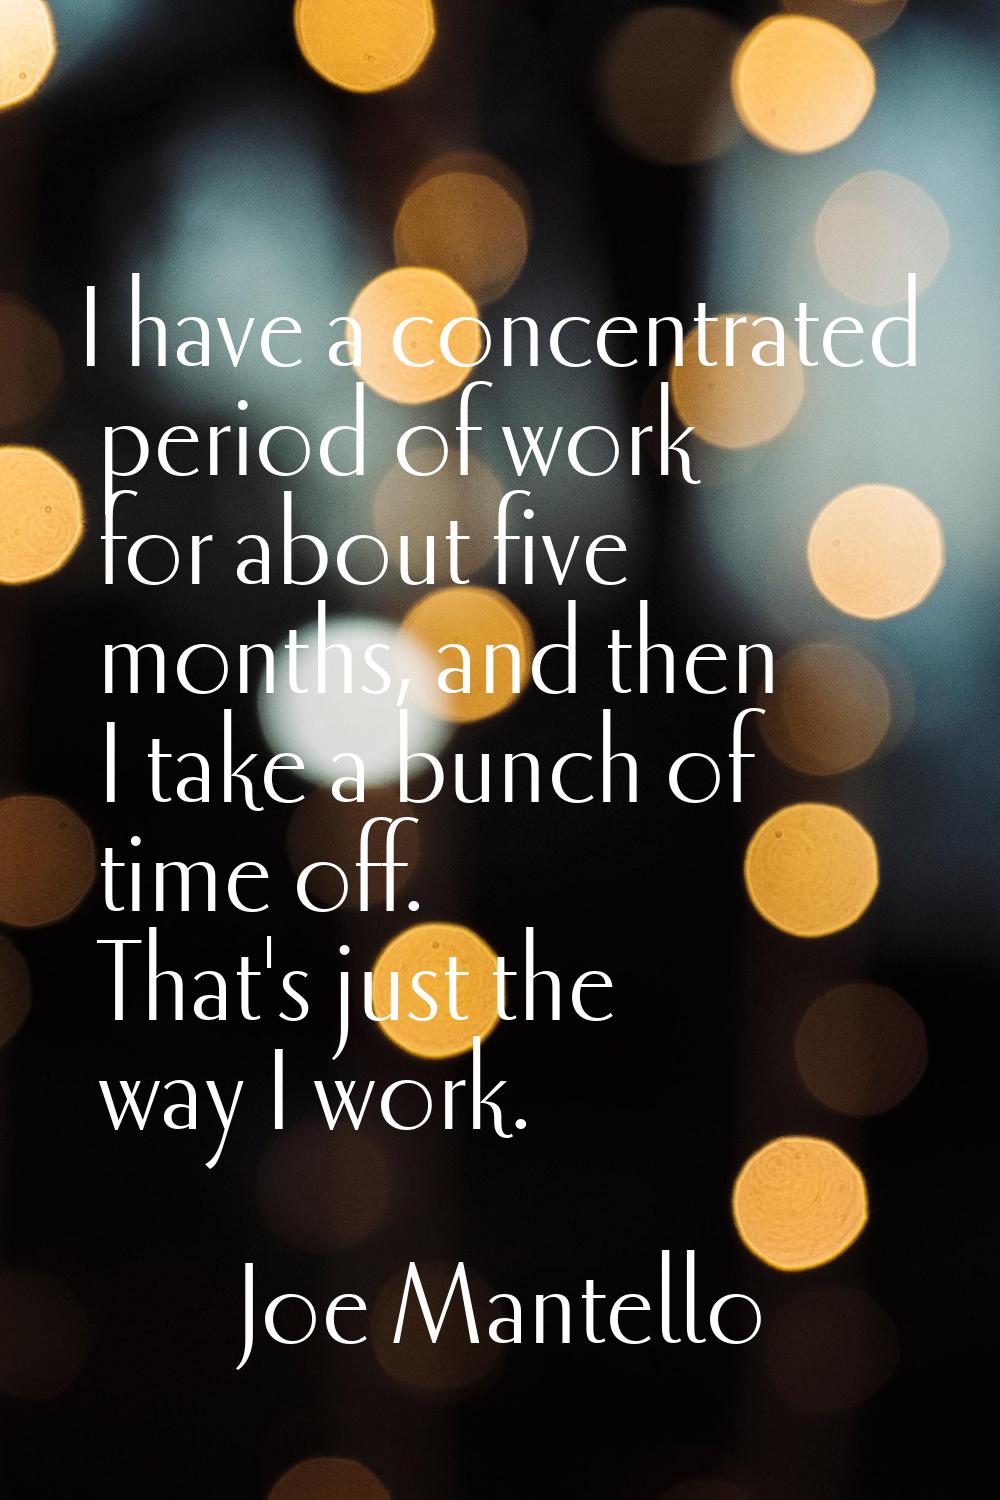 I have a concentrated period of work for about five months, and then I take a bunch of time off. Th